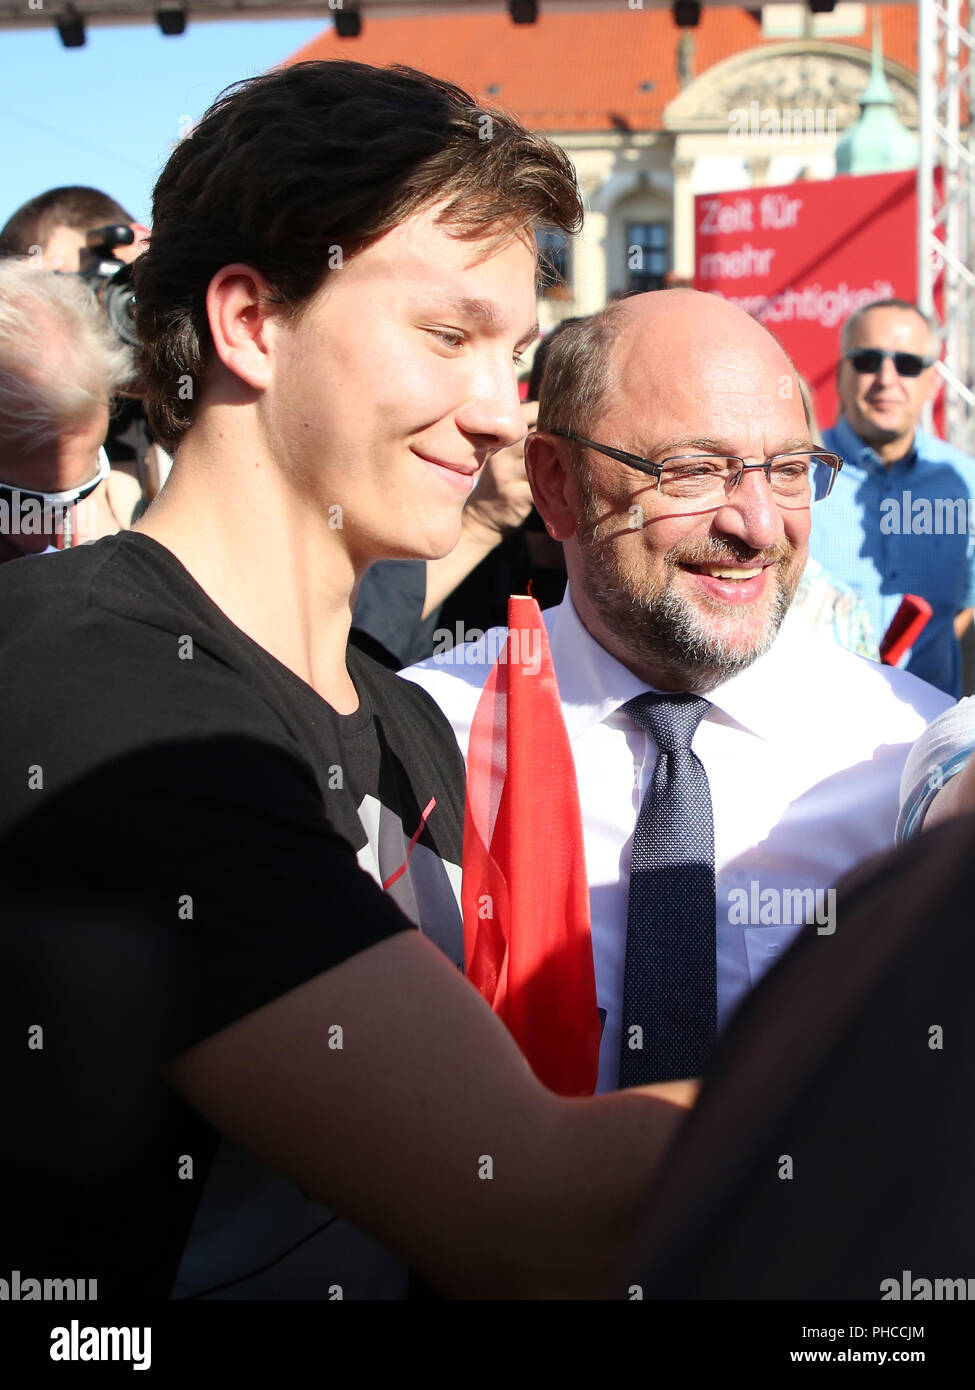 SPD party chairman and chancellor candidate Martin Schulz makes selfie Stock Photo